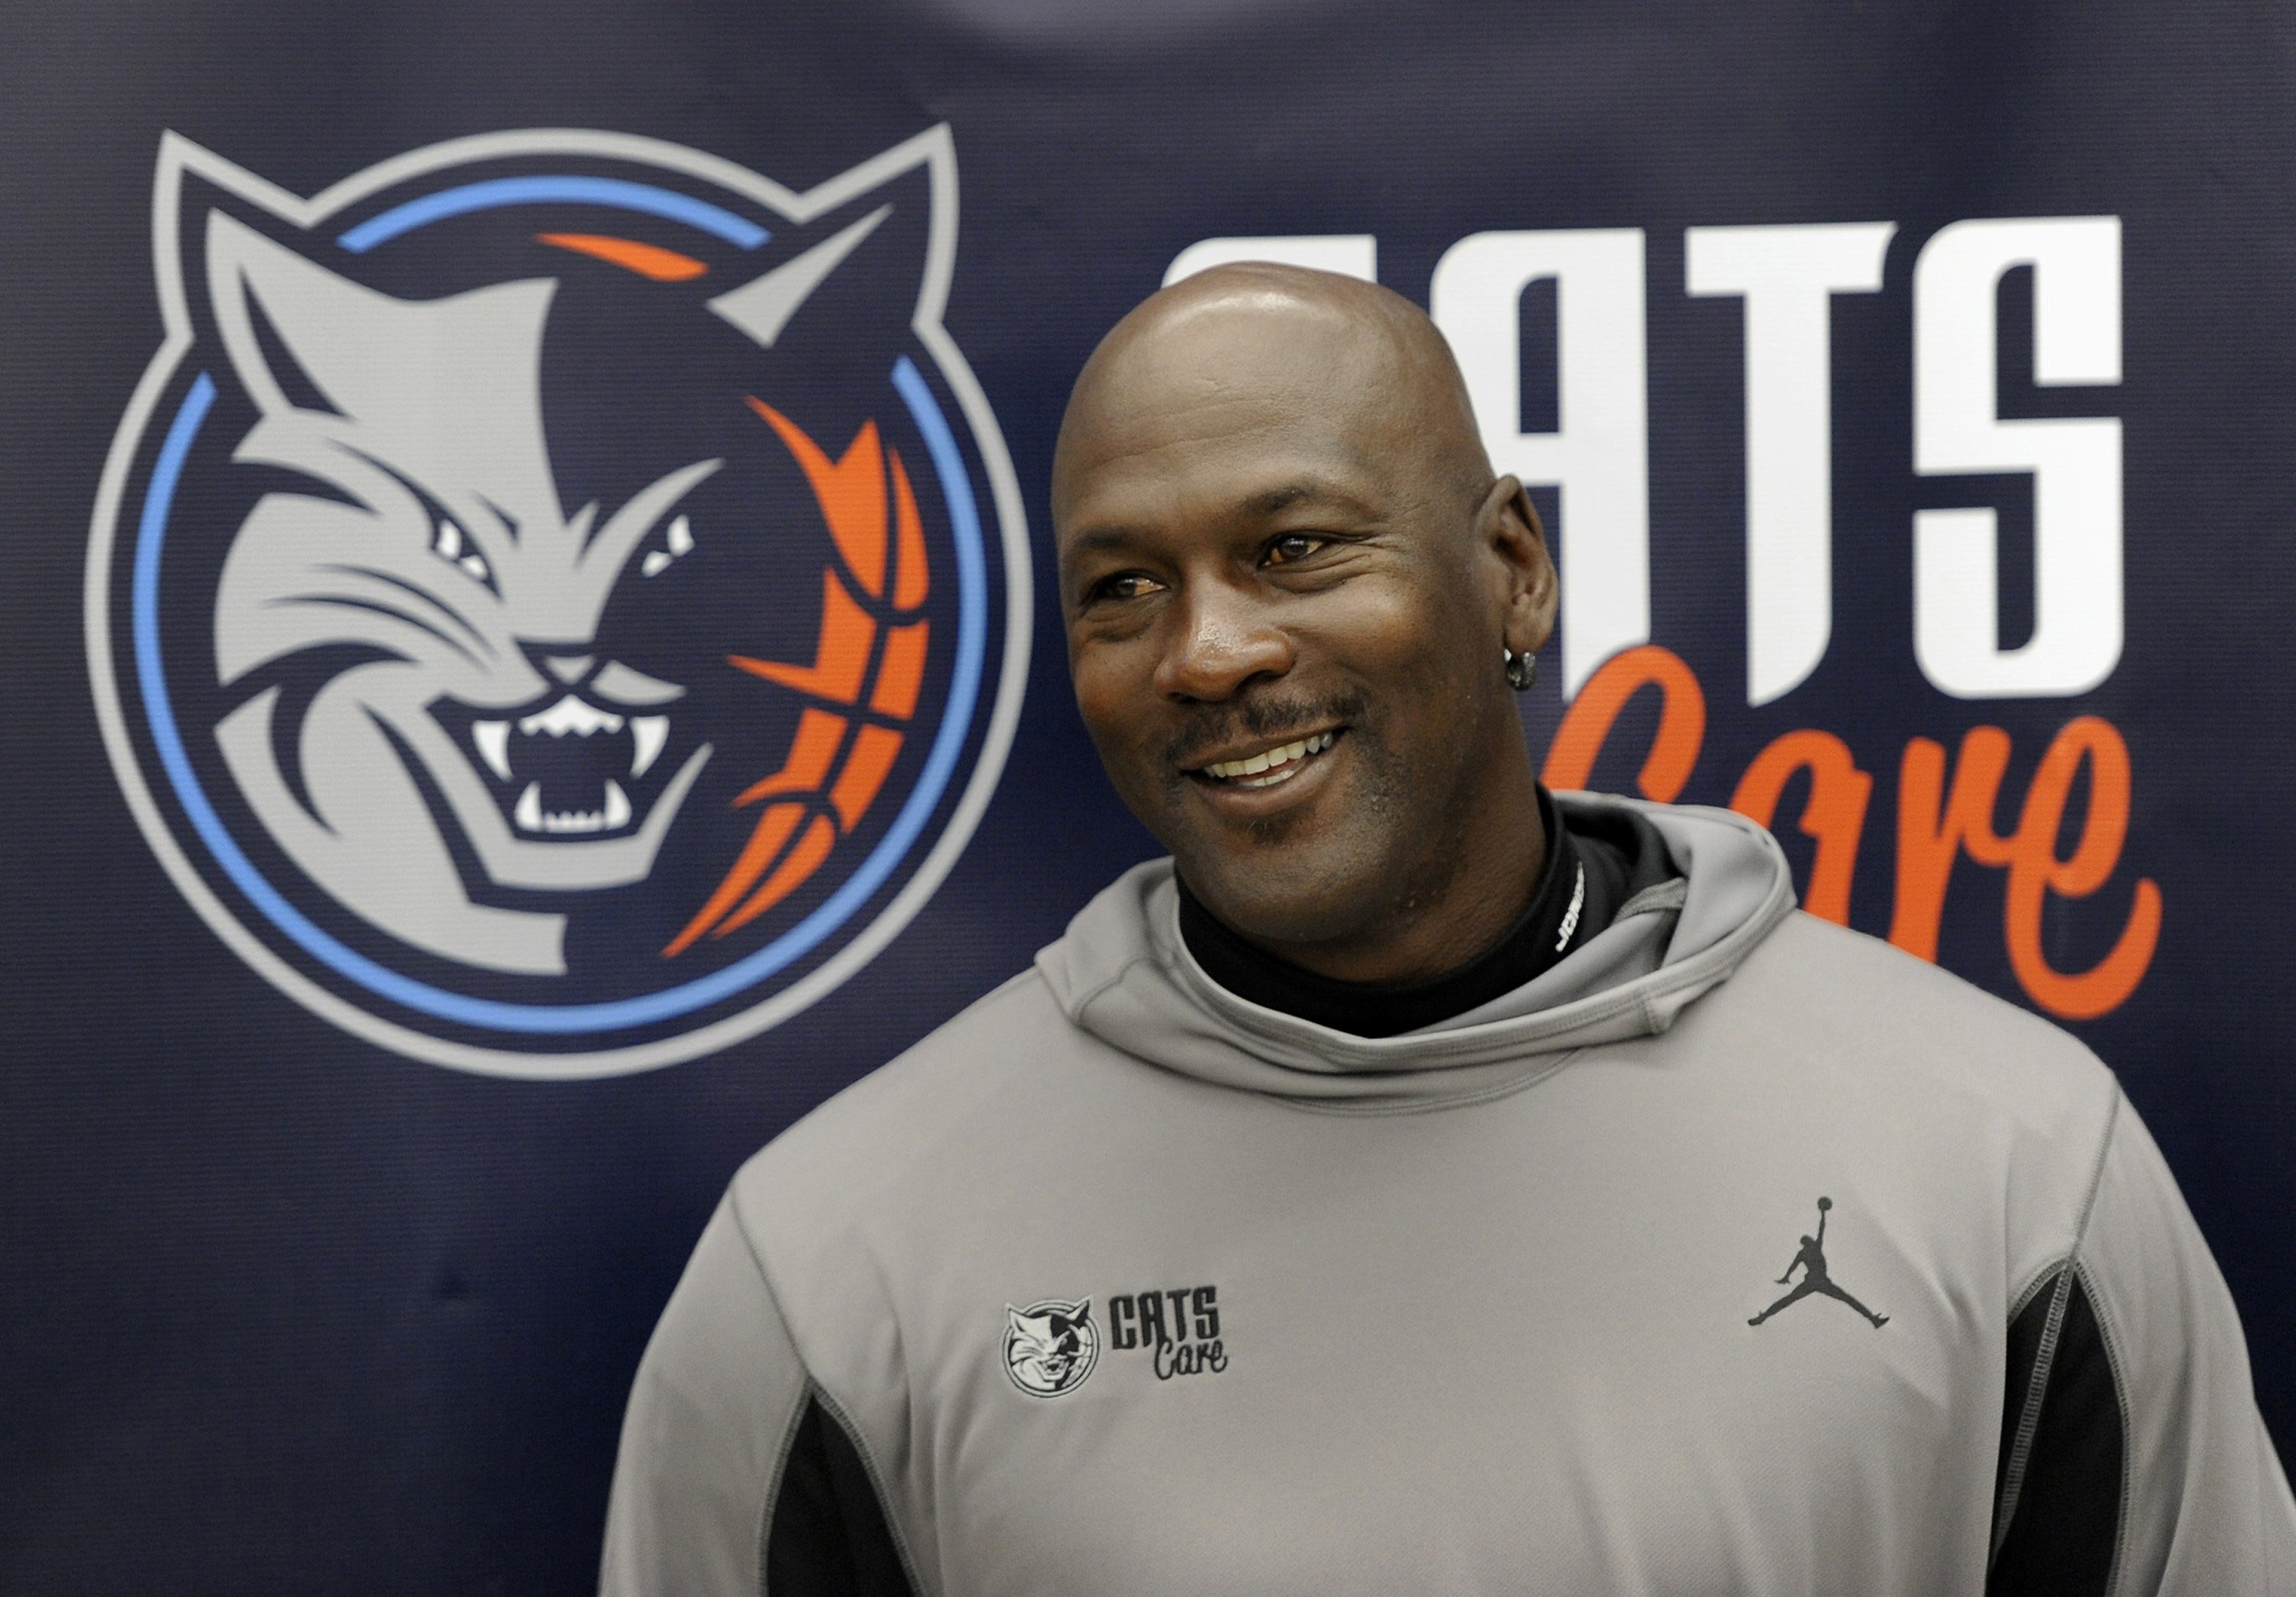 Michael Jordan during a press conference at West Charlotte High School on Thursday, March 21, 2013  | Photo: Getty Images